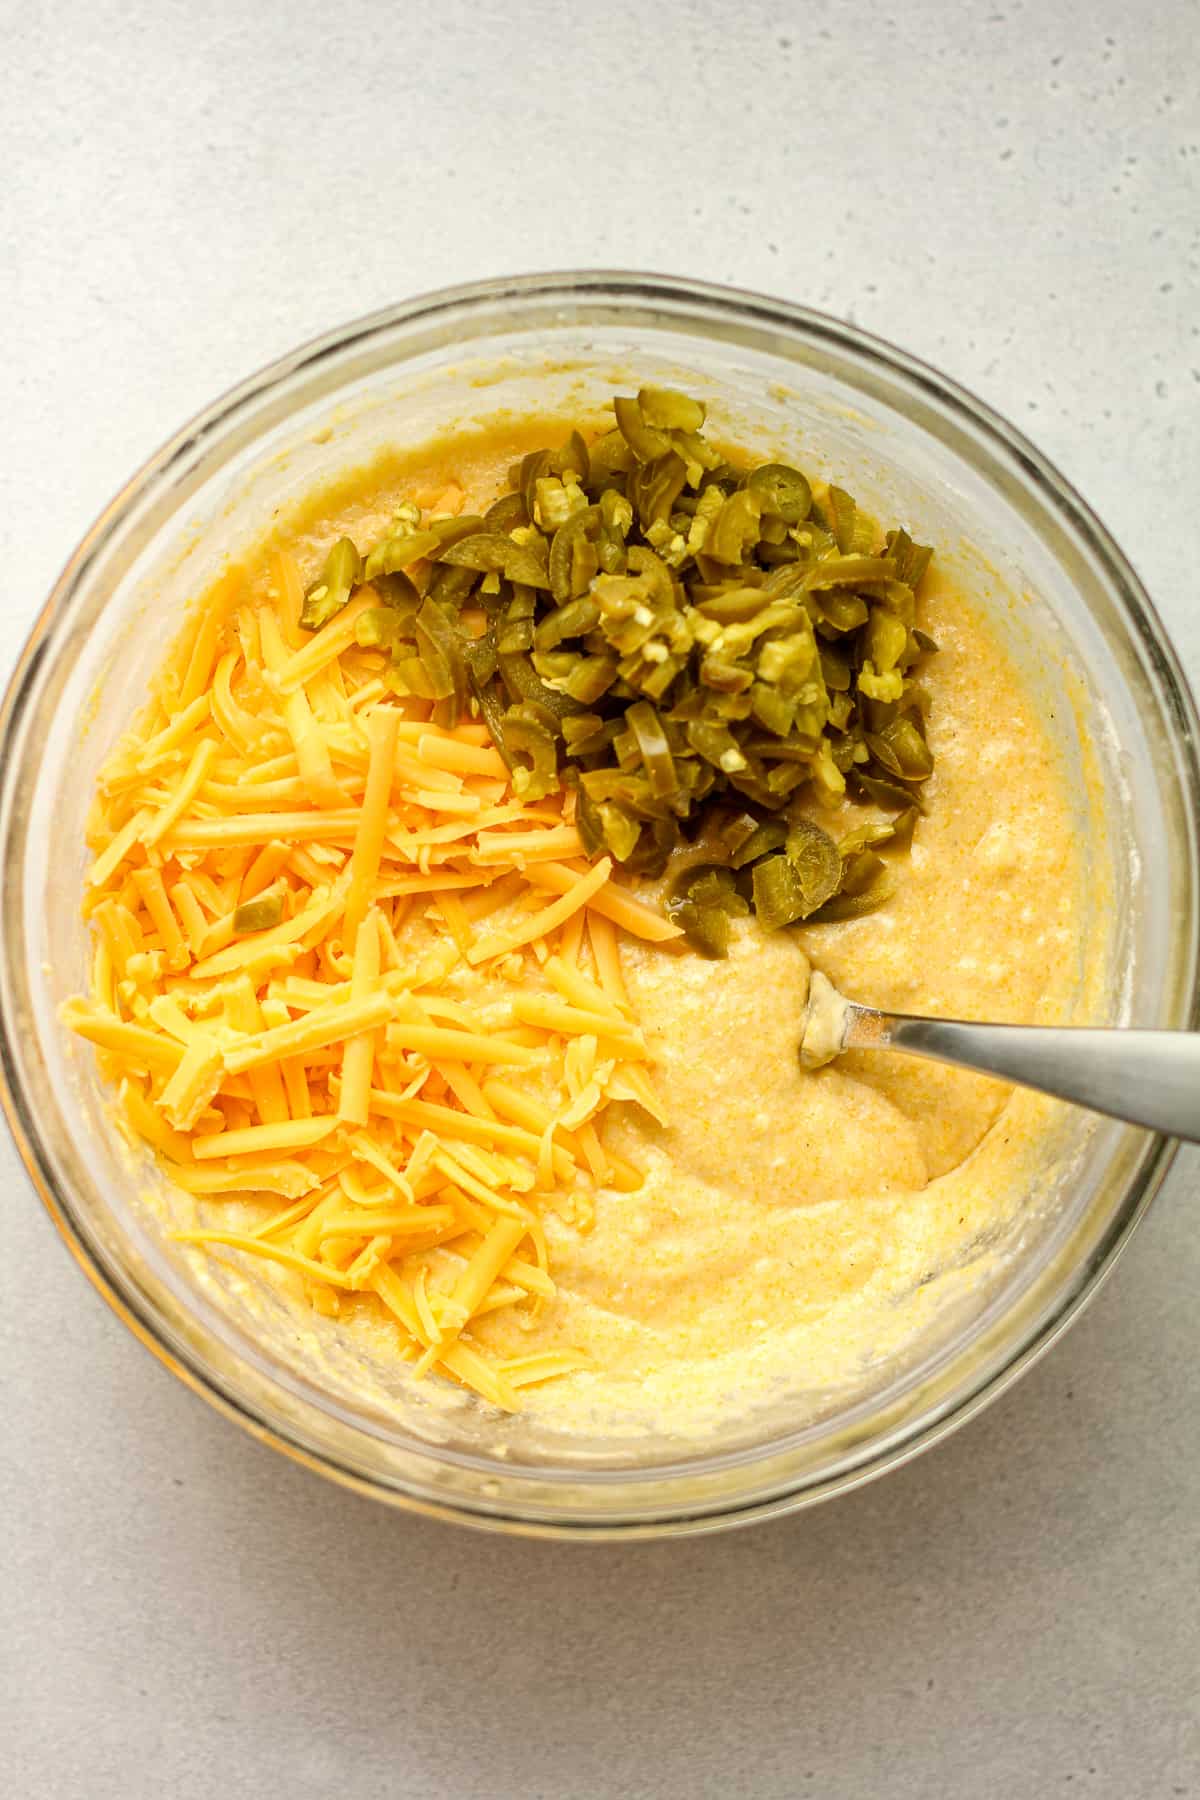 A bowl of the cornbread batter with chopped jalapeños and shredded cheddar cheese.